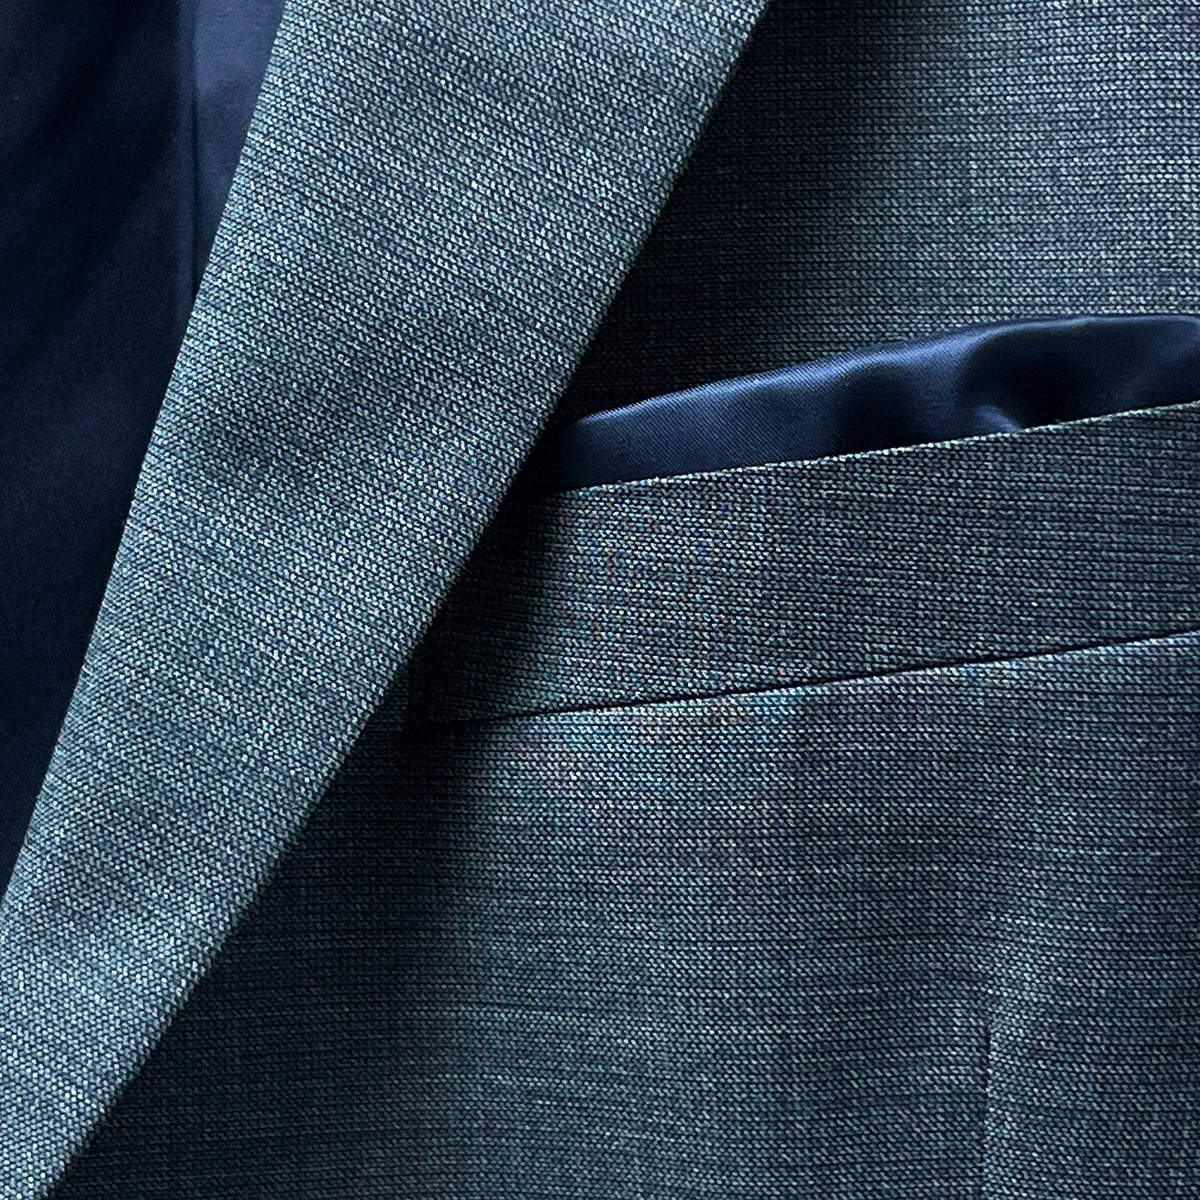 Coordinated pocket square enhancing the elegance of a dark grey nailhead suit.